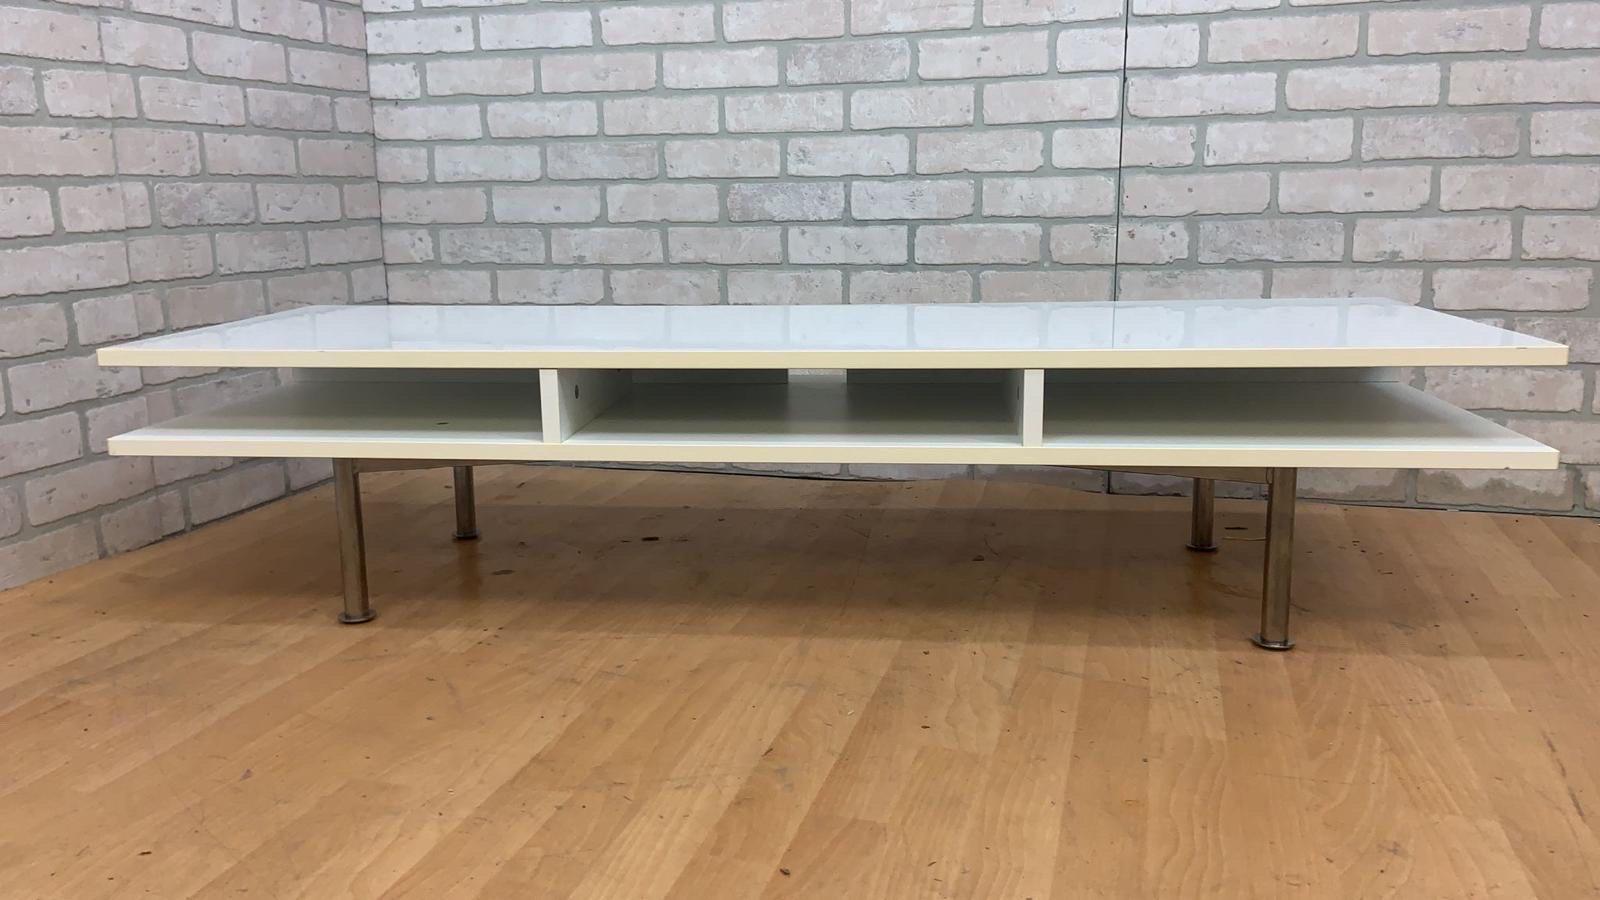 IKEA Tofteryd Styled TV Console Table Gloss White

Featuring a discontinued Ikea Tofteryd styled TV Bench in Glossy White. Great piece to add to your living room/bedroom or can even be used as a coffee table. 

Circa 21st Century 

Dimensions:
H: